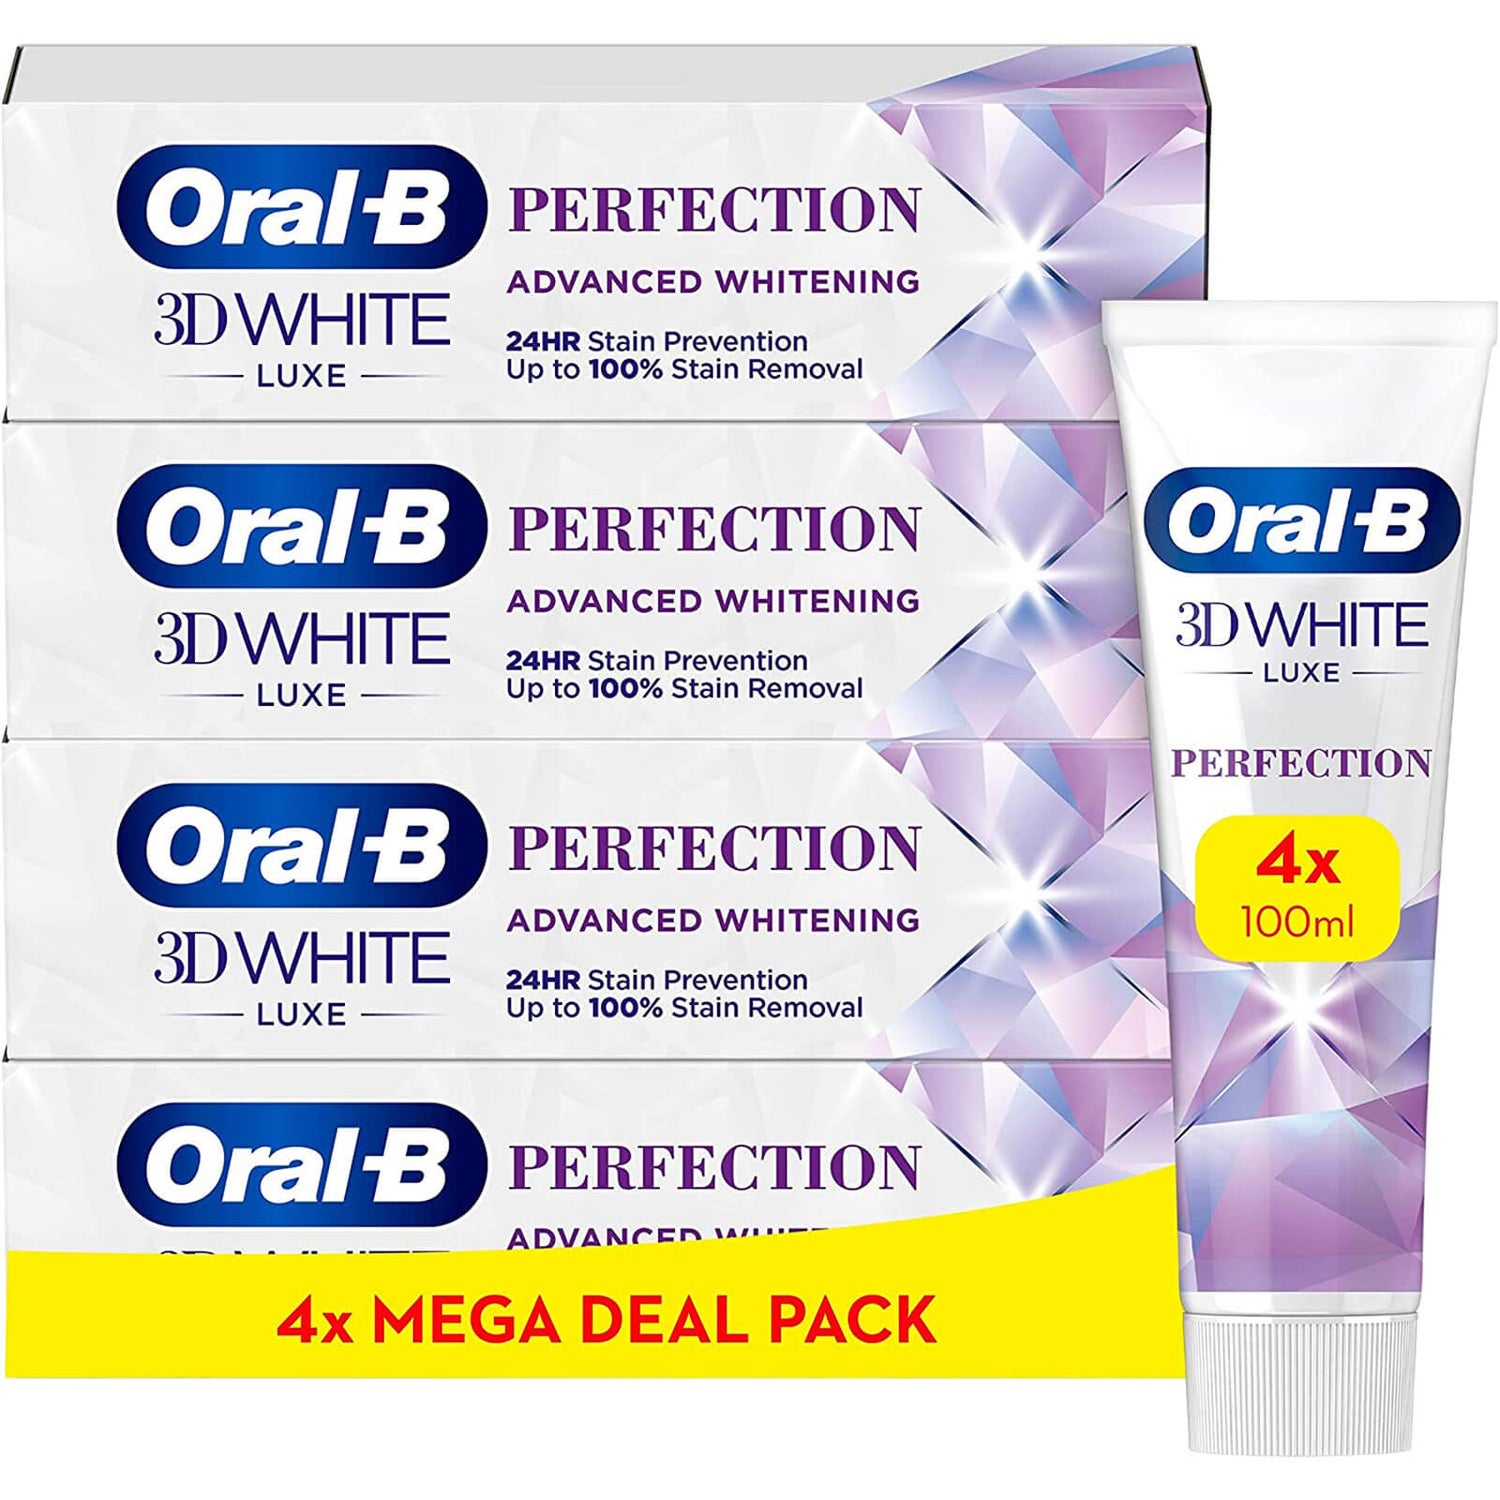 Oral-B 3DWhite Luxe Perfection Toothpaste 4x100ml, Shipped In Recycled Carton